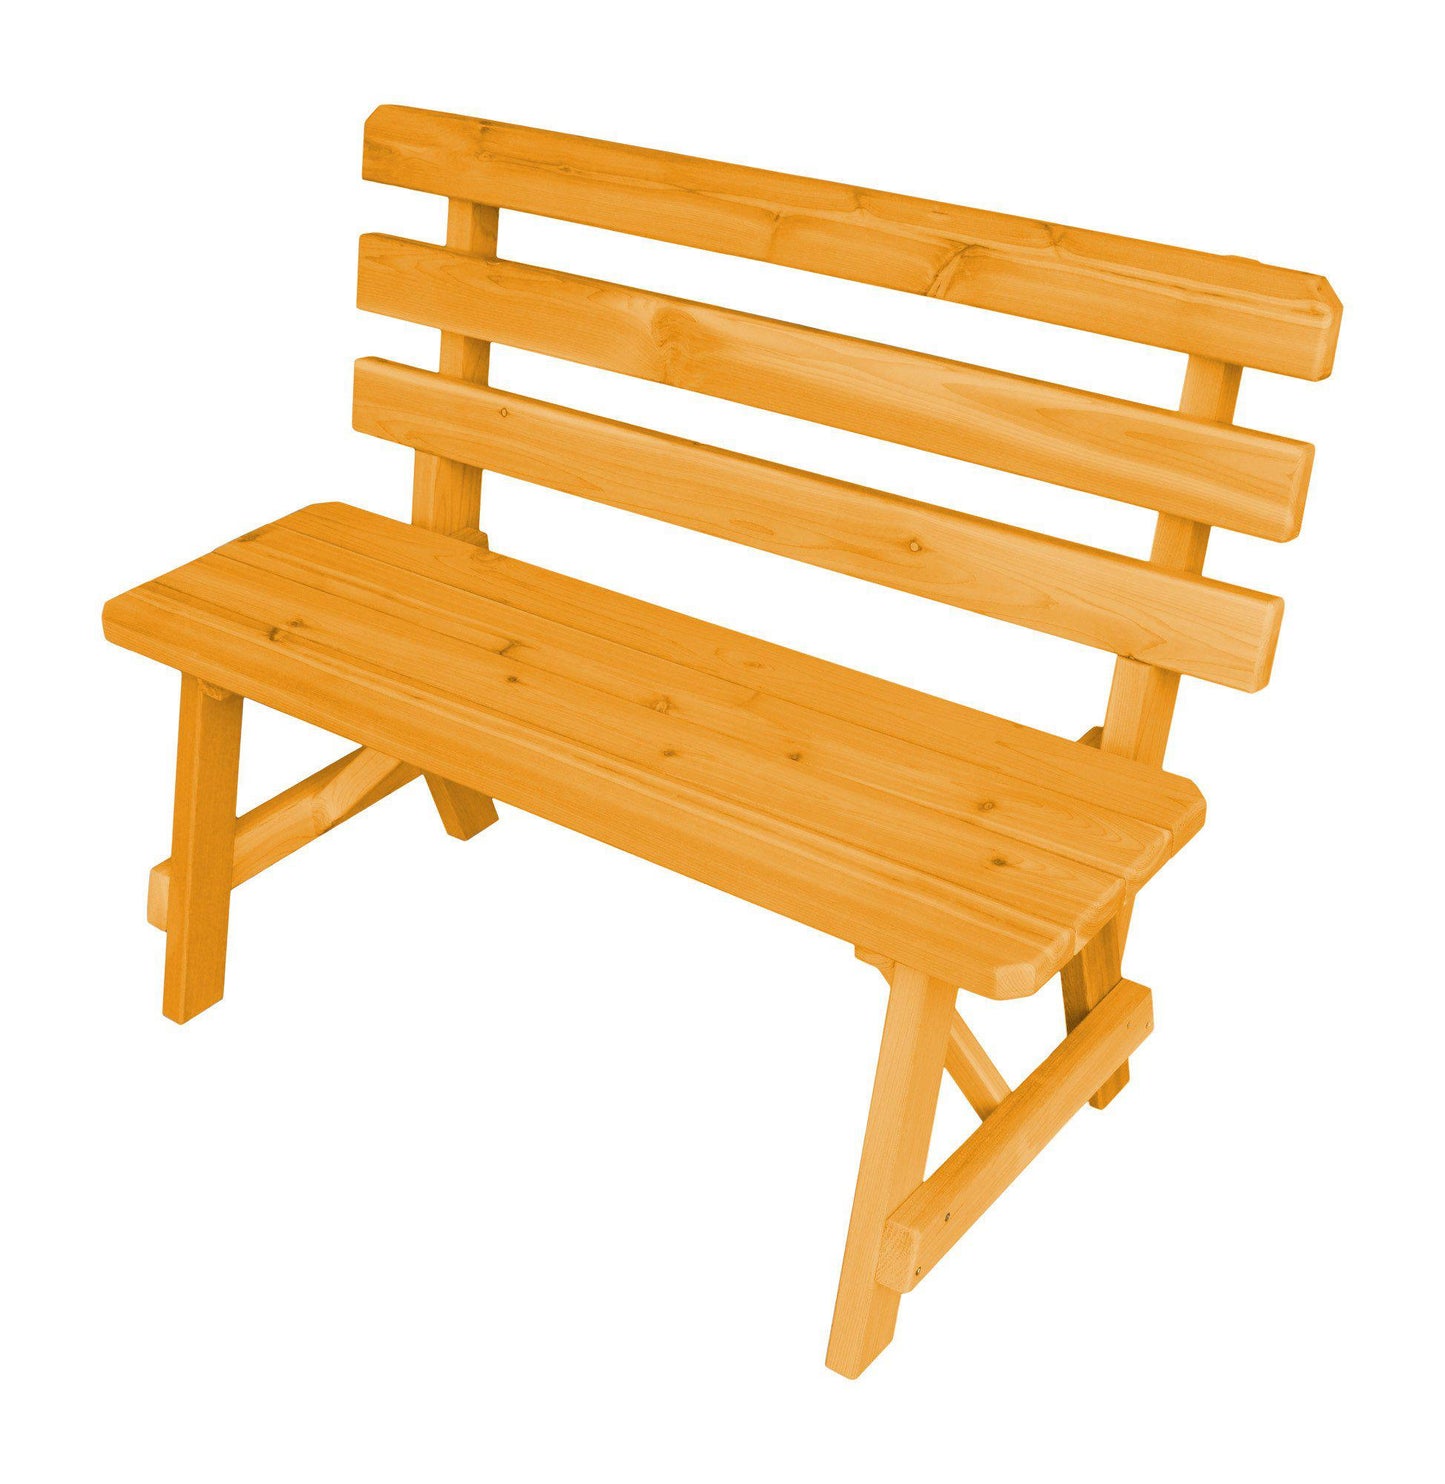 A&L FURNITURE CO. Western Red Cedar 33" Traditional Backed Bench Only - LEAD TIME TO SHIP 2 WEEKS